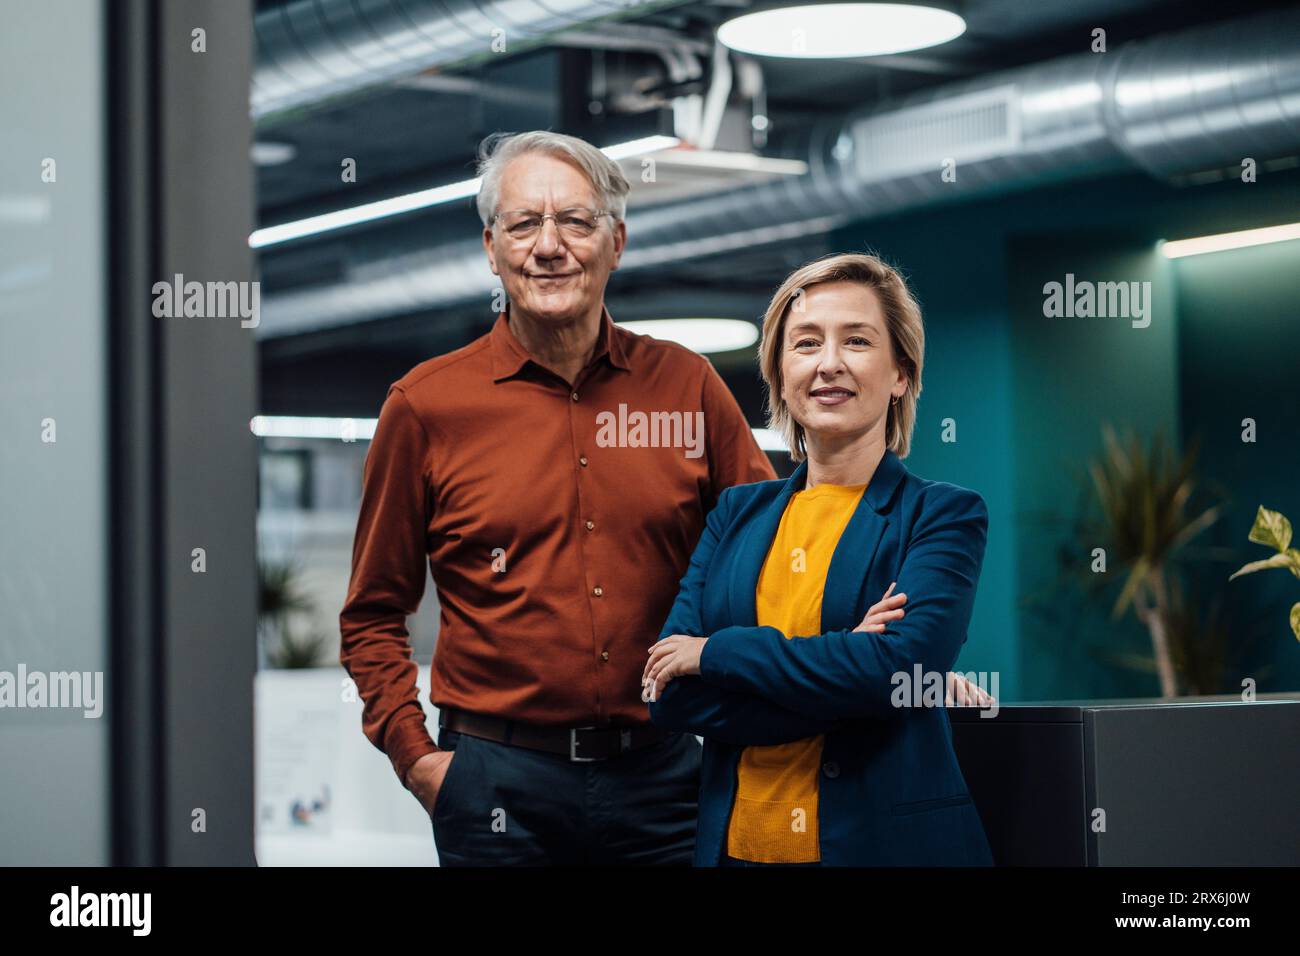 Smiling businesswoman and businessman in illuminated office Stock Photo